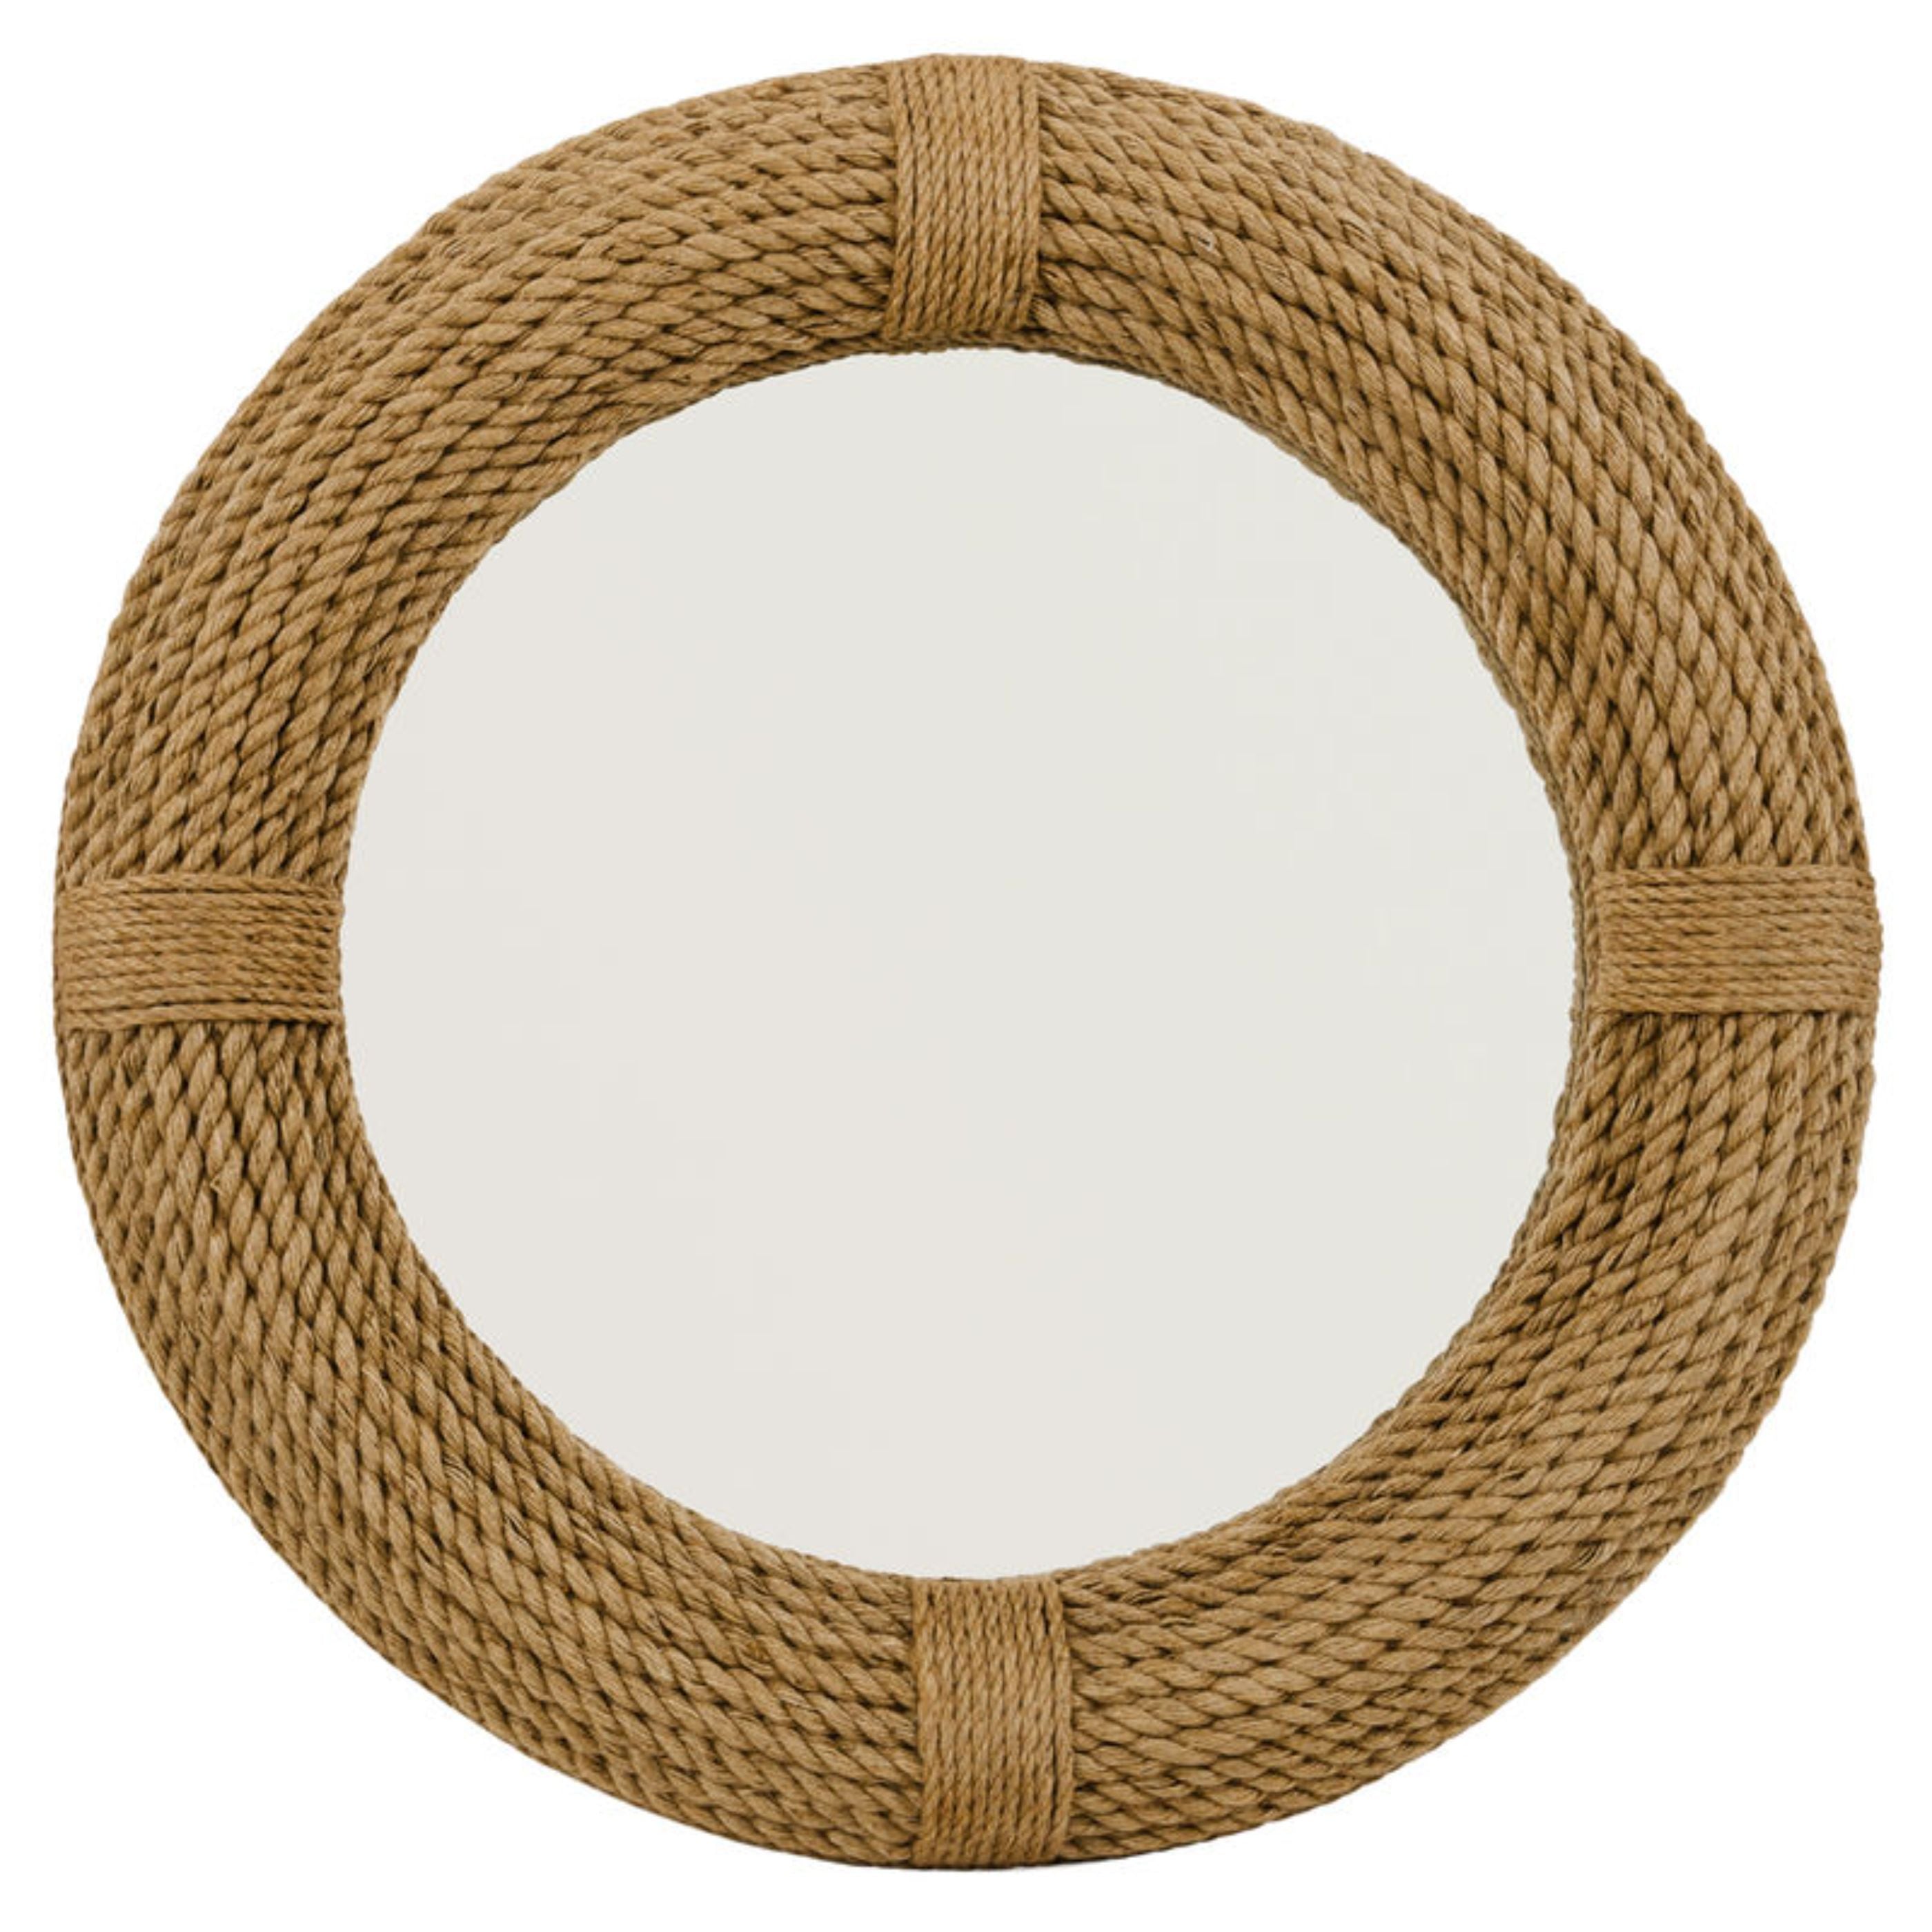 Jamie Young Company - 7AF-MIR3 - Round Rope Mirror -  - Natural